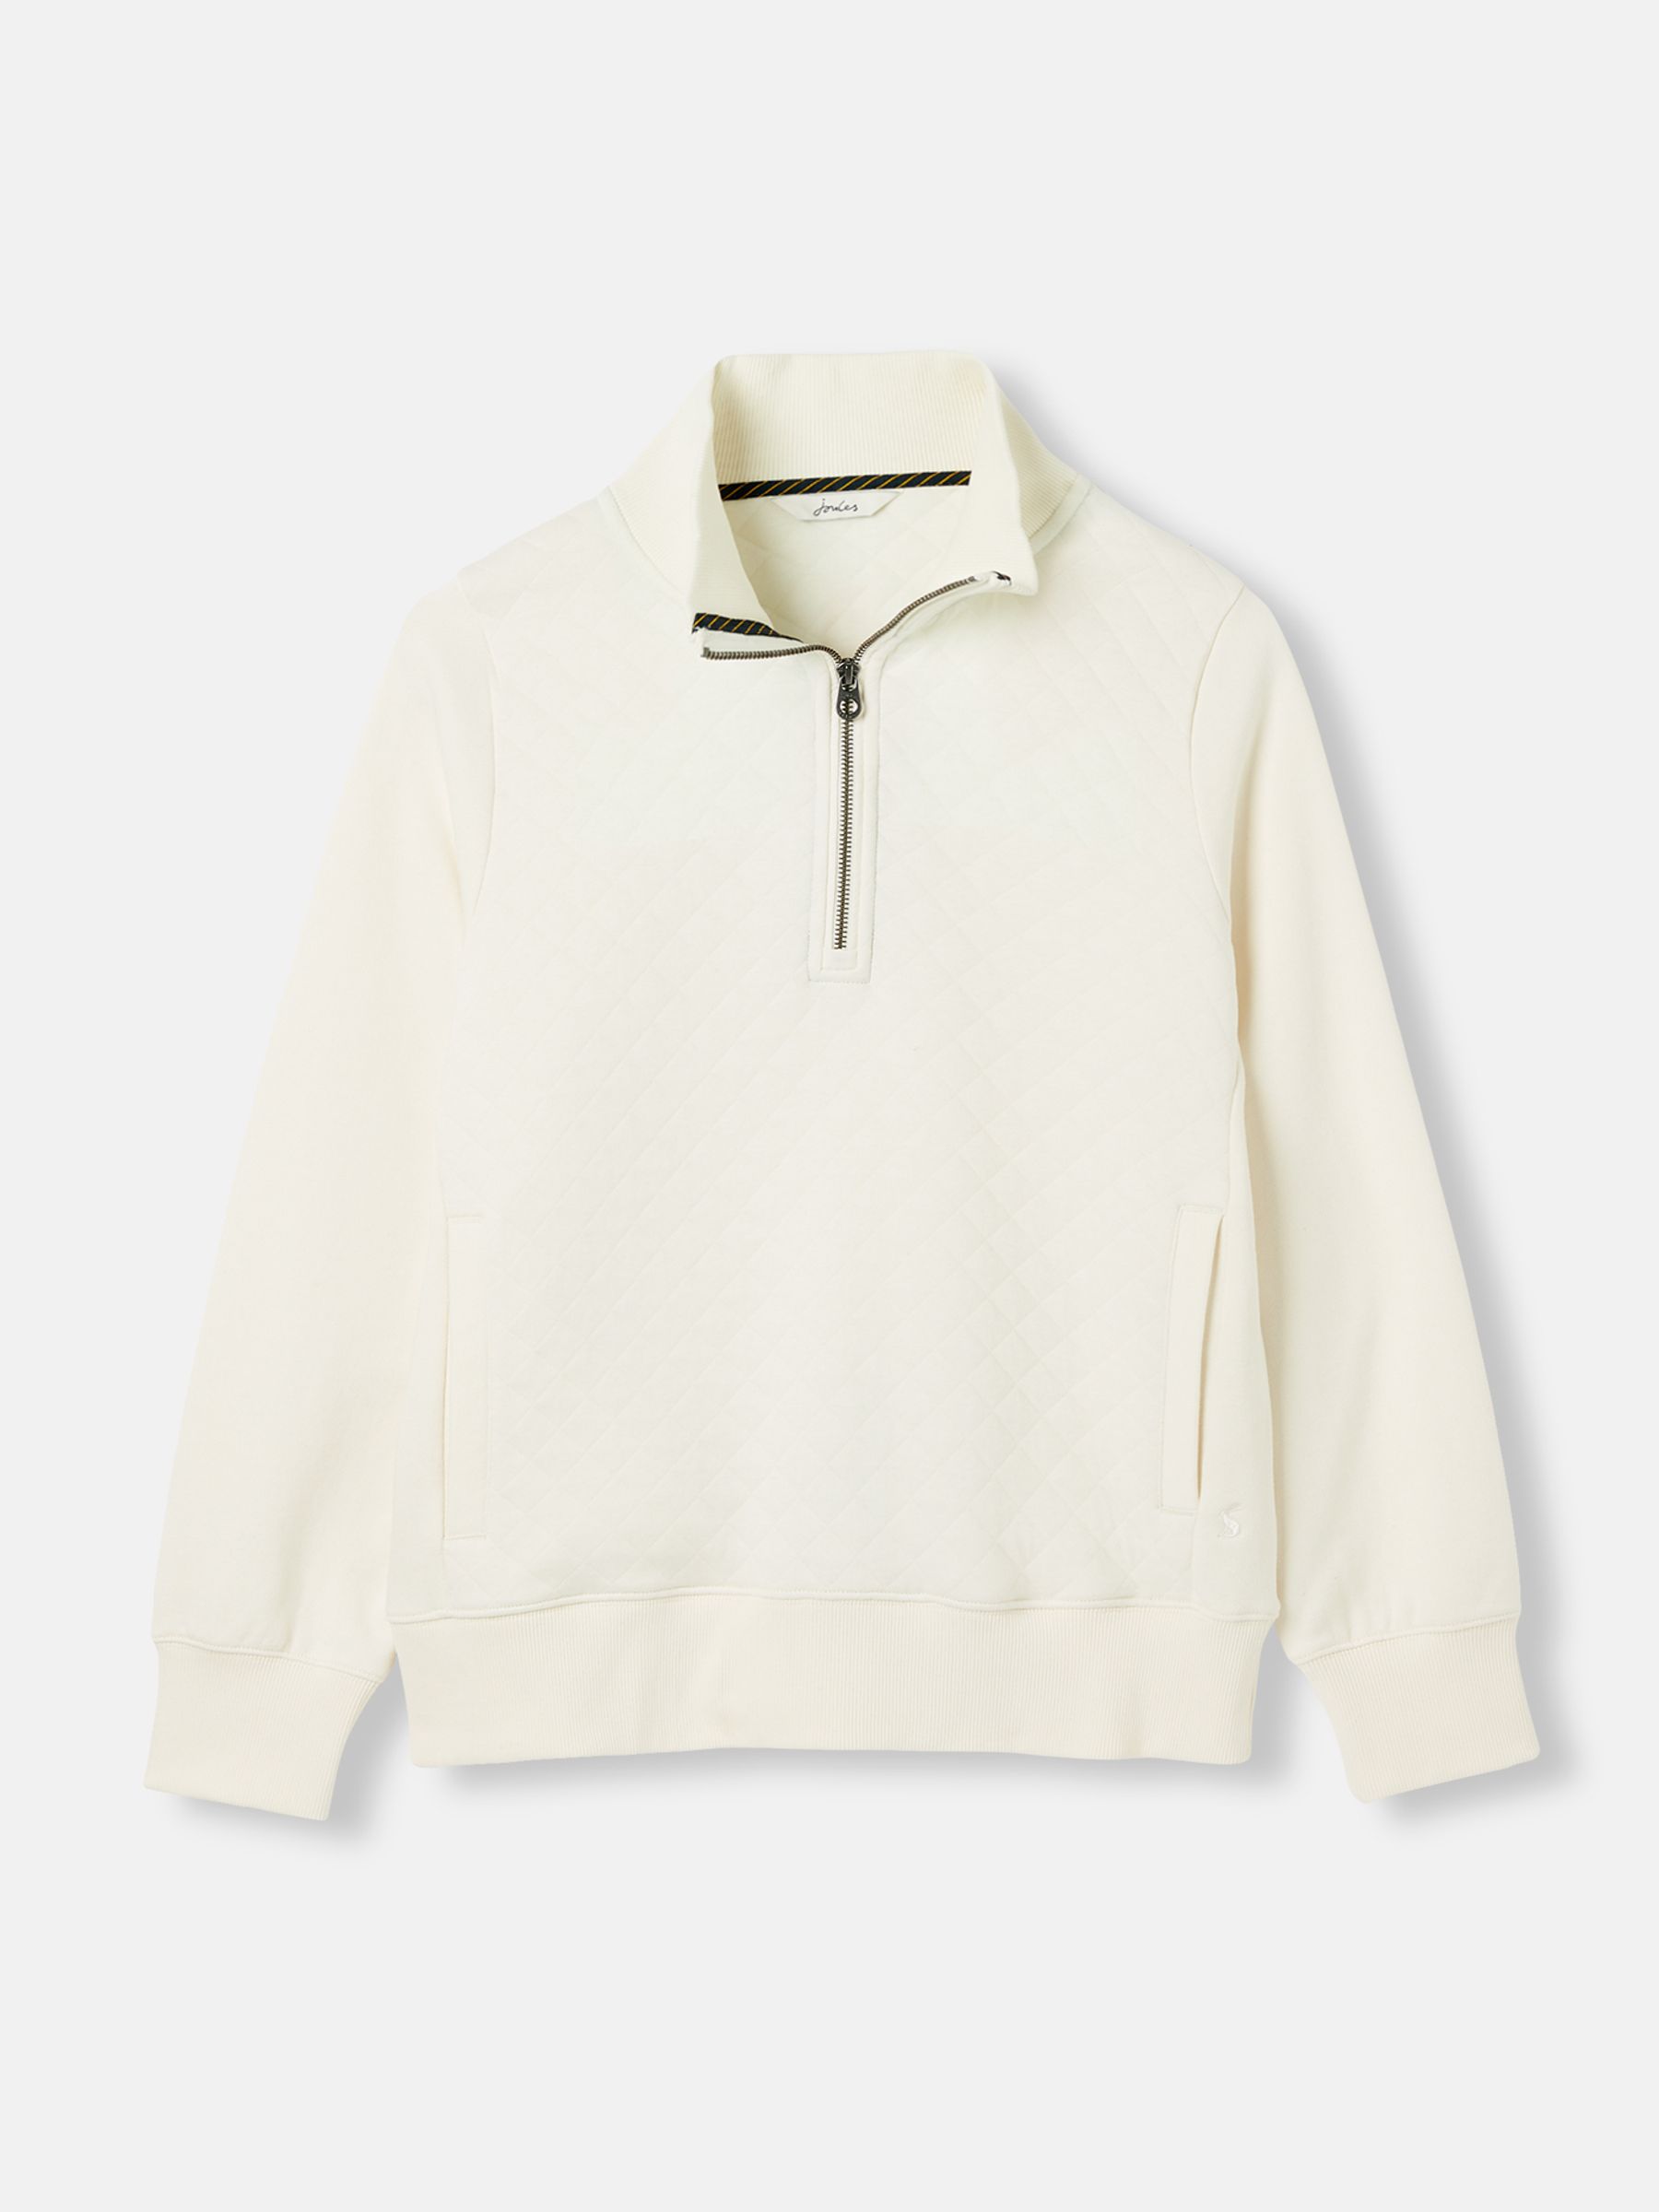 Buy Anisa Cream Quilted Zip Sweat Top from the Joules online shop